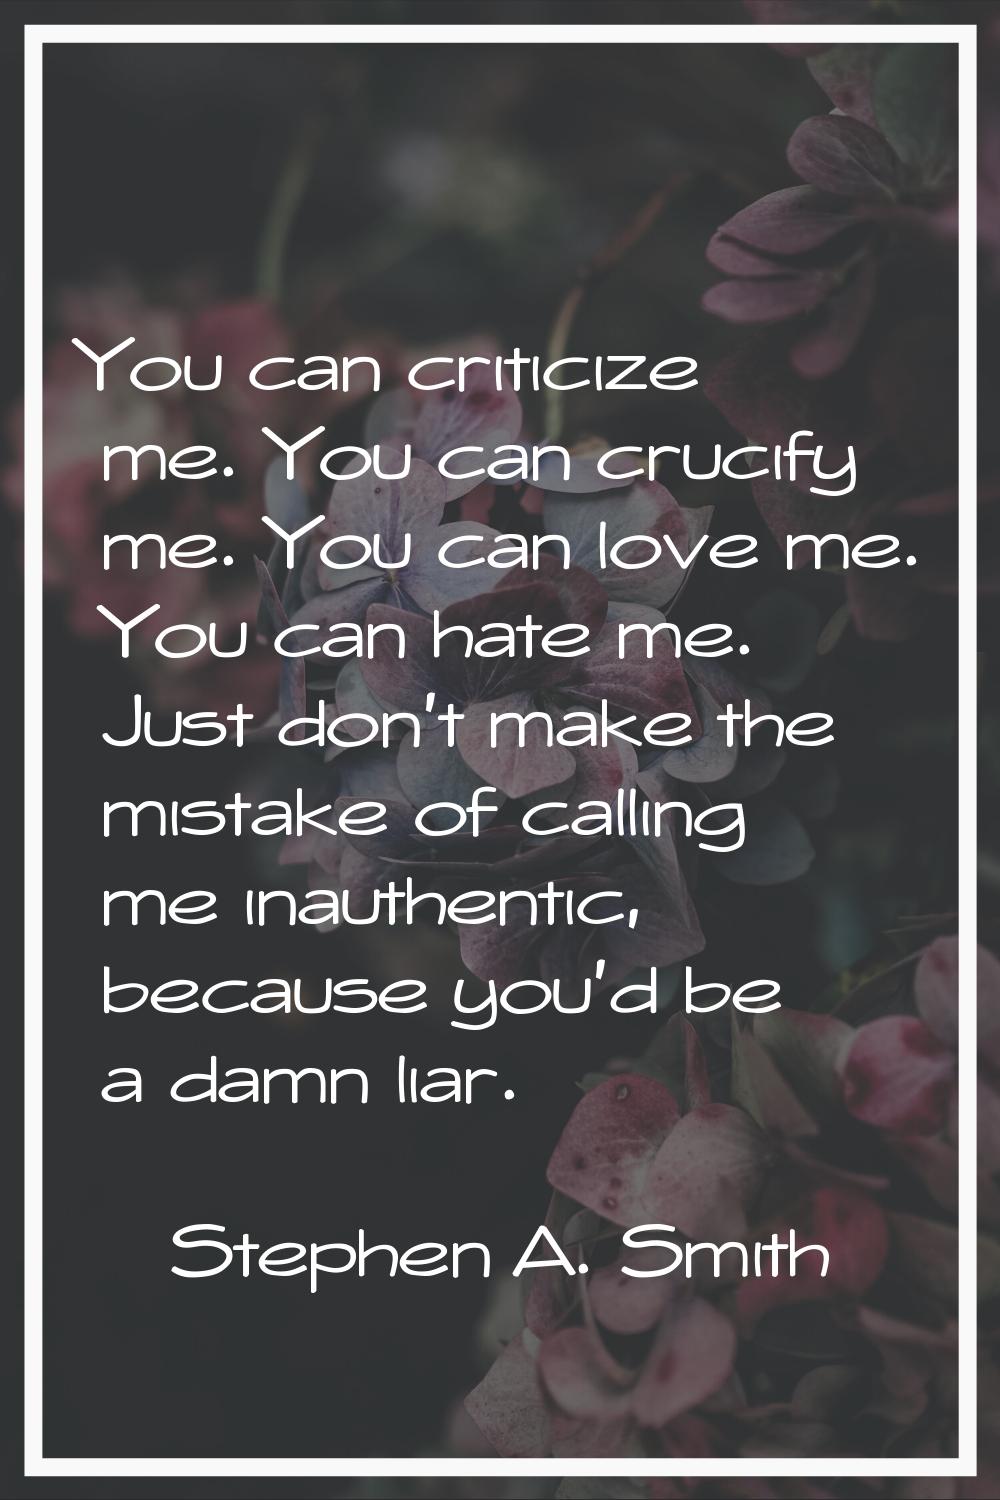 You can criticize me. You can crucify me. You can love me. You can hate me. Just don't make the mis